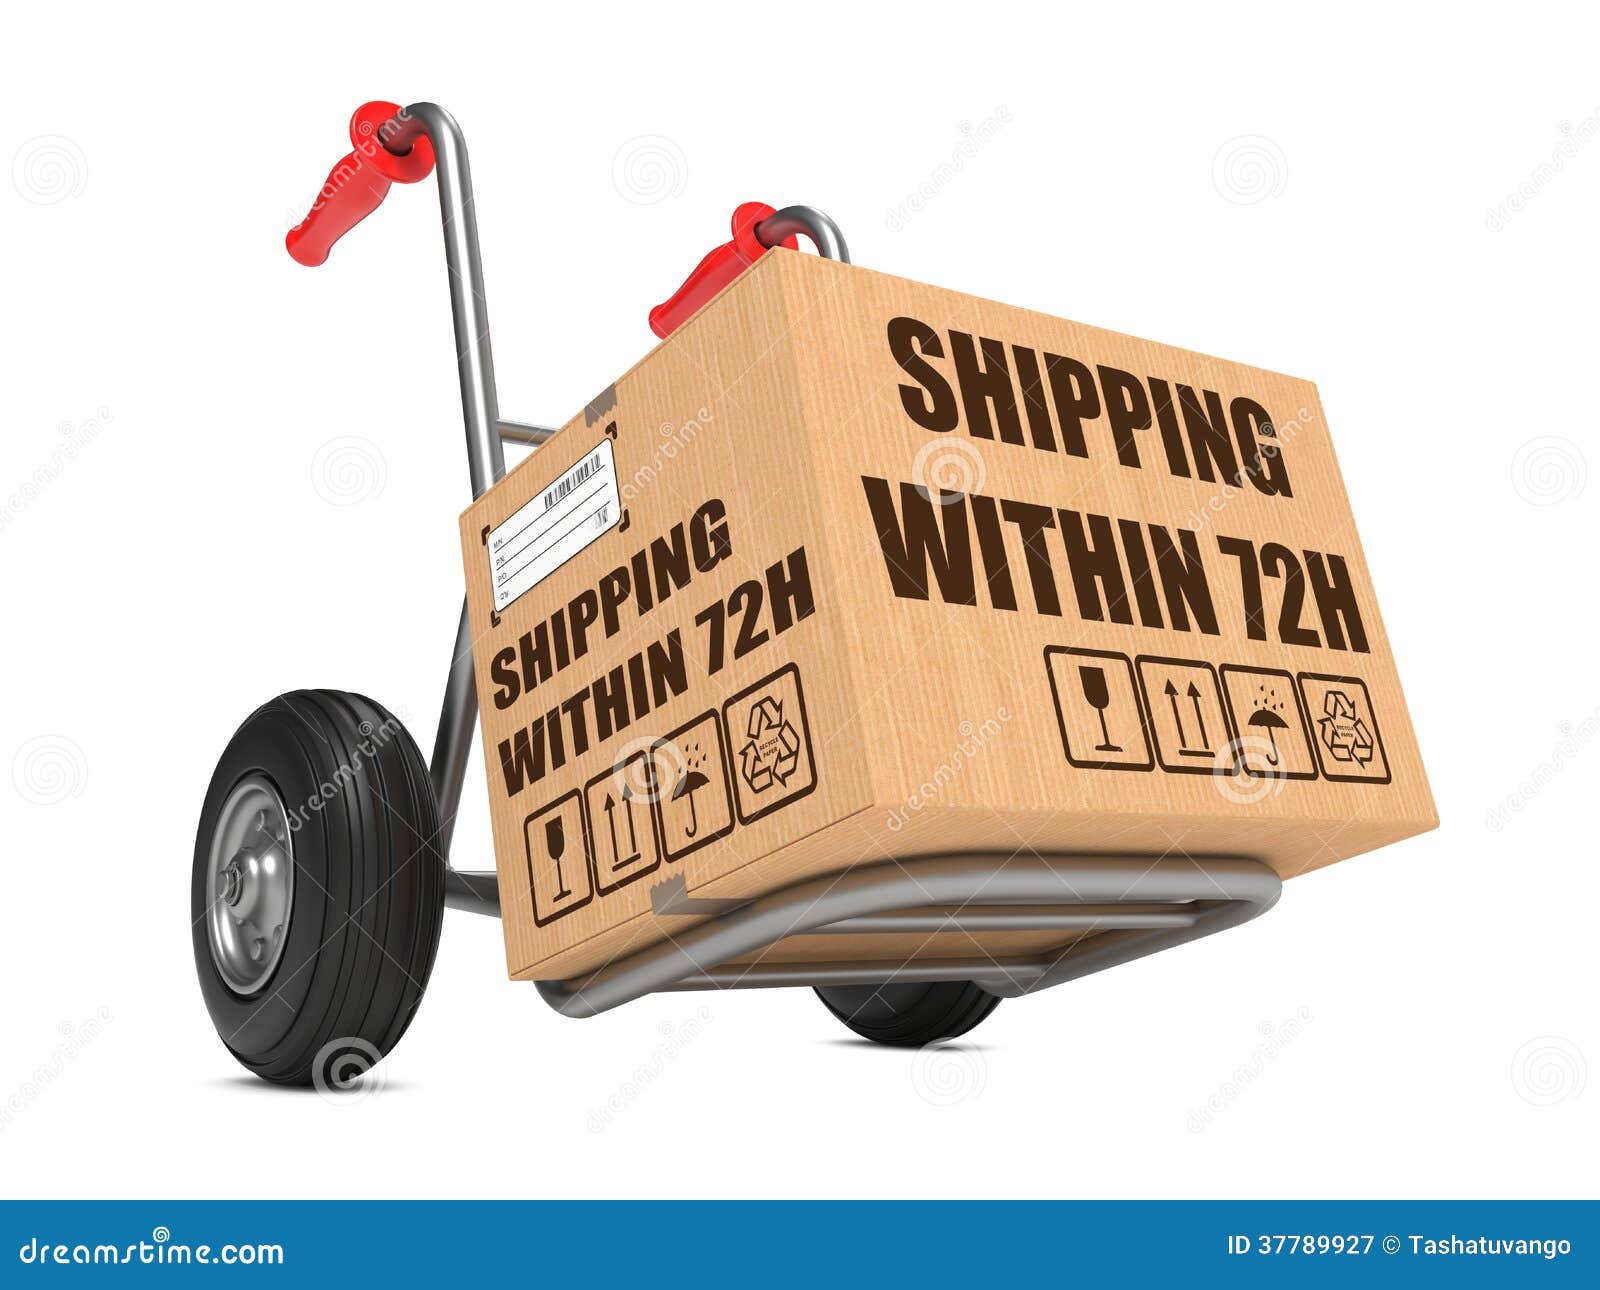 shipping within 72h - cardboard box on hand truck.